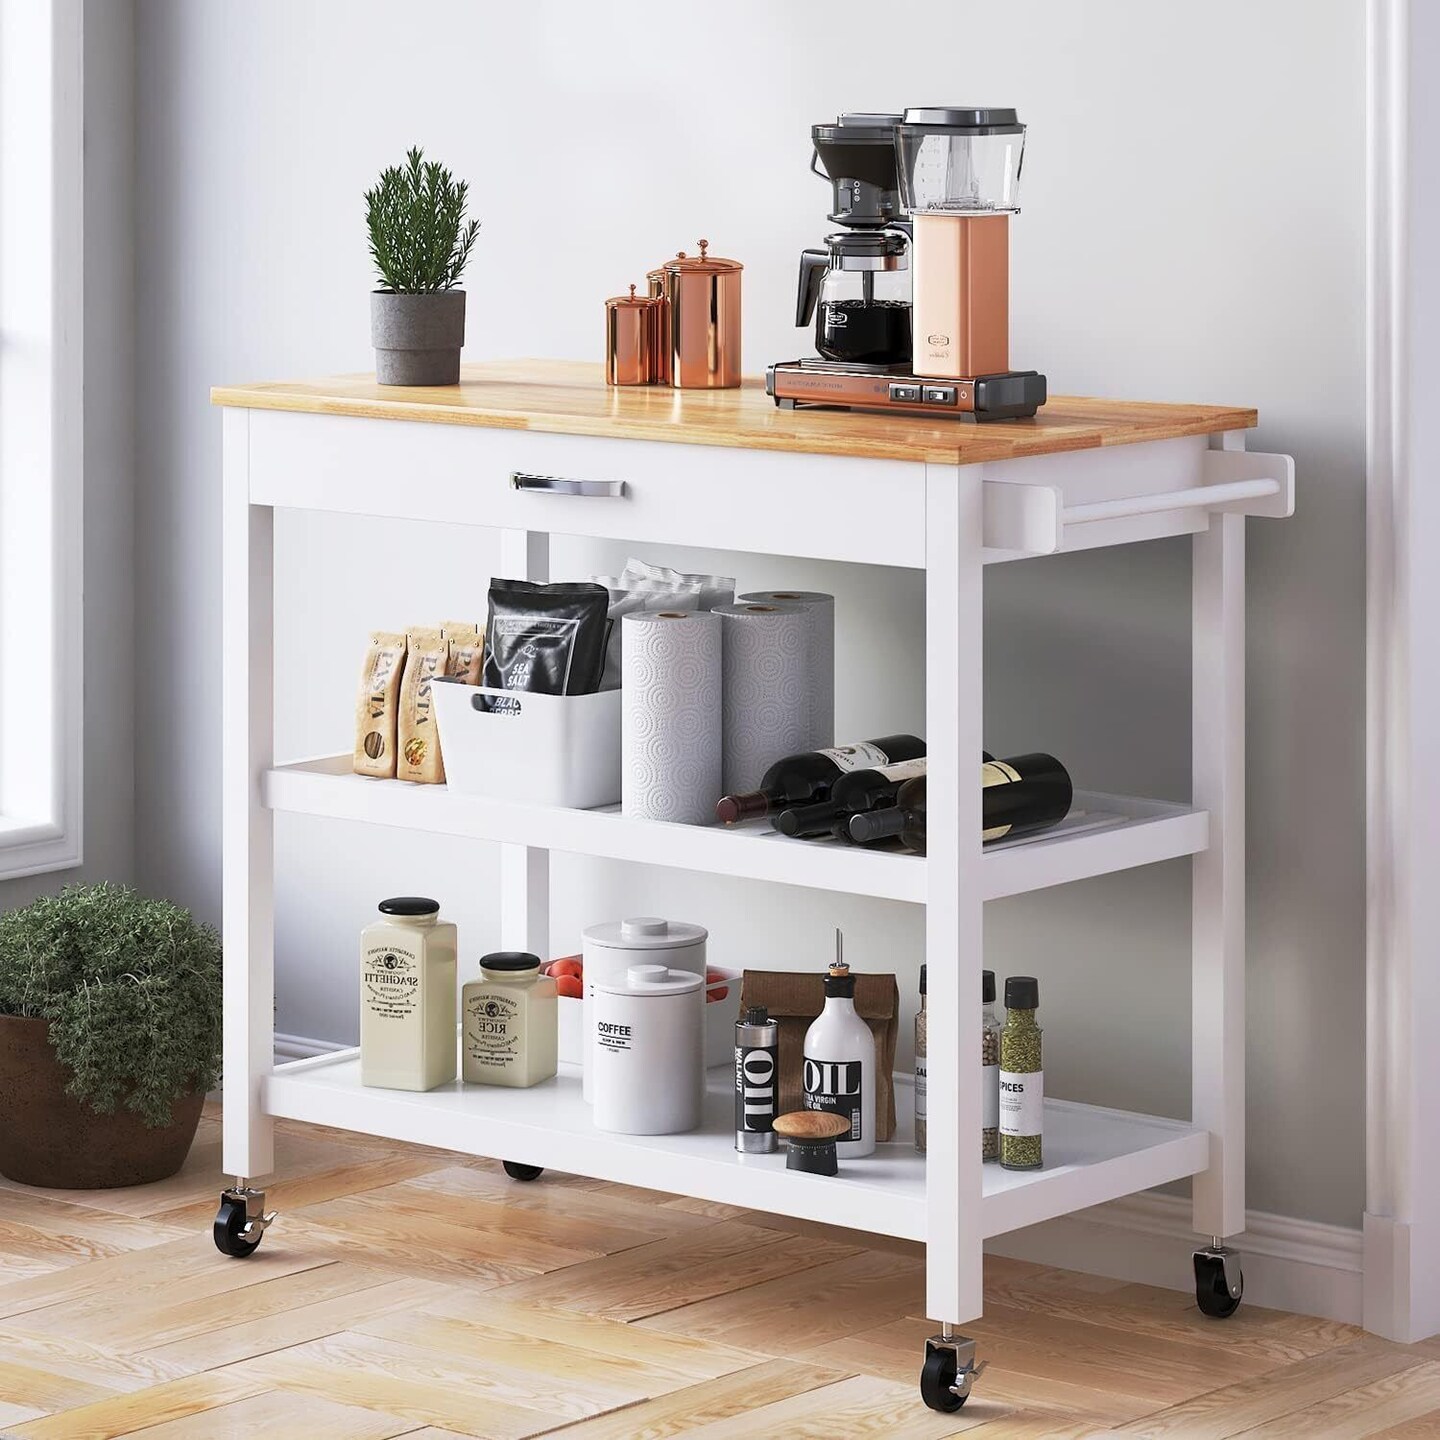 Heavy Duty Rolling Storage Shelves with Towel Rack